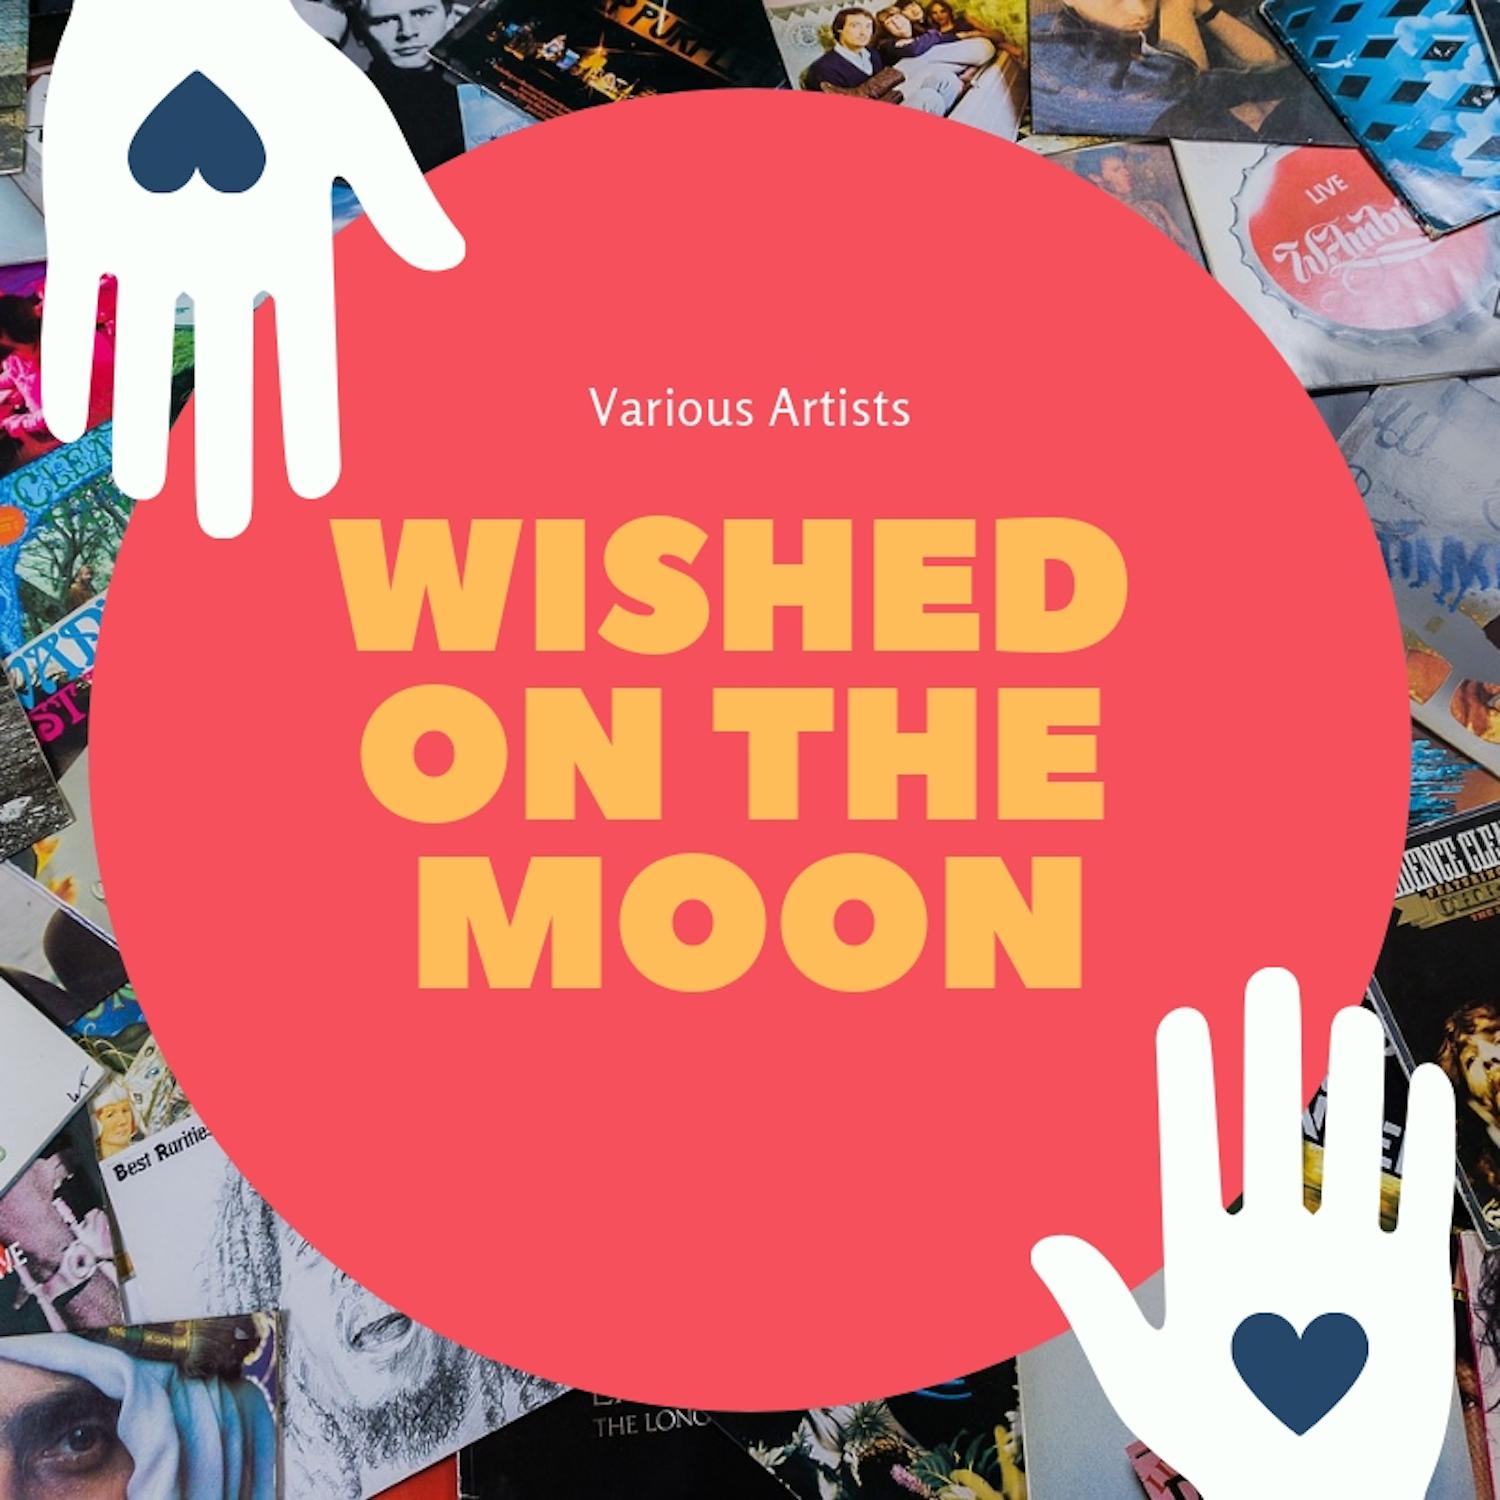 Wished On the Moon